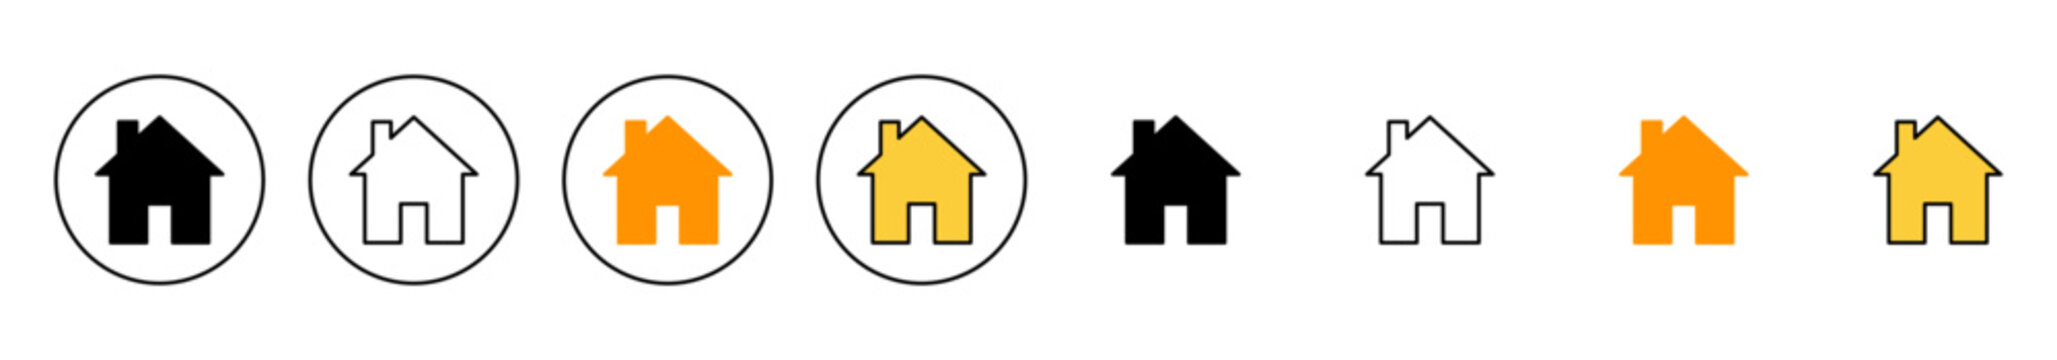 House icon set vector. Home sign and symbol